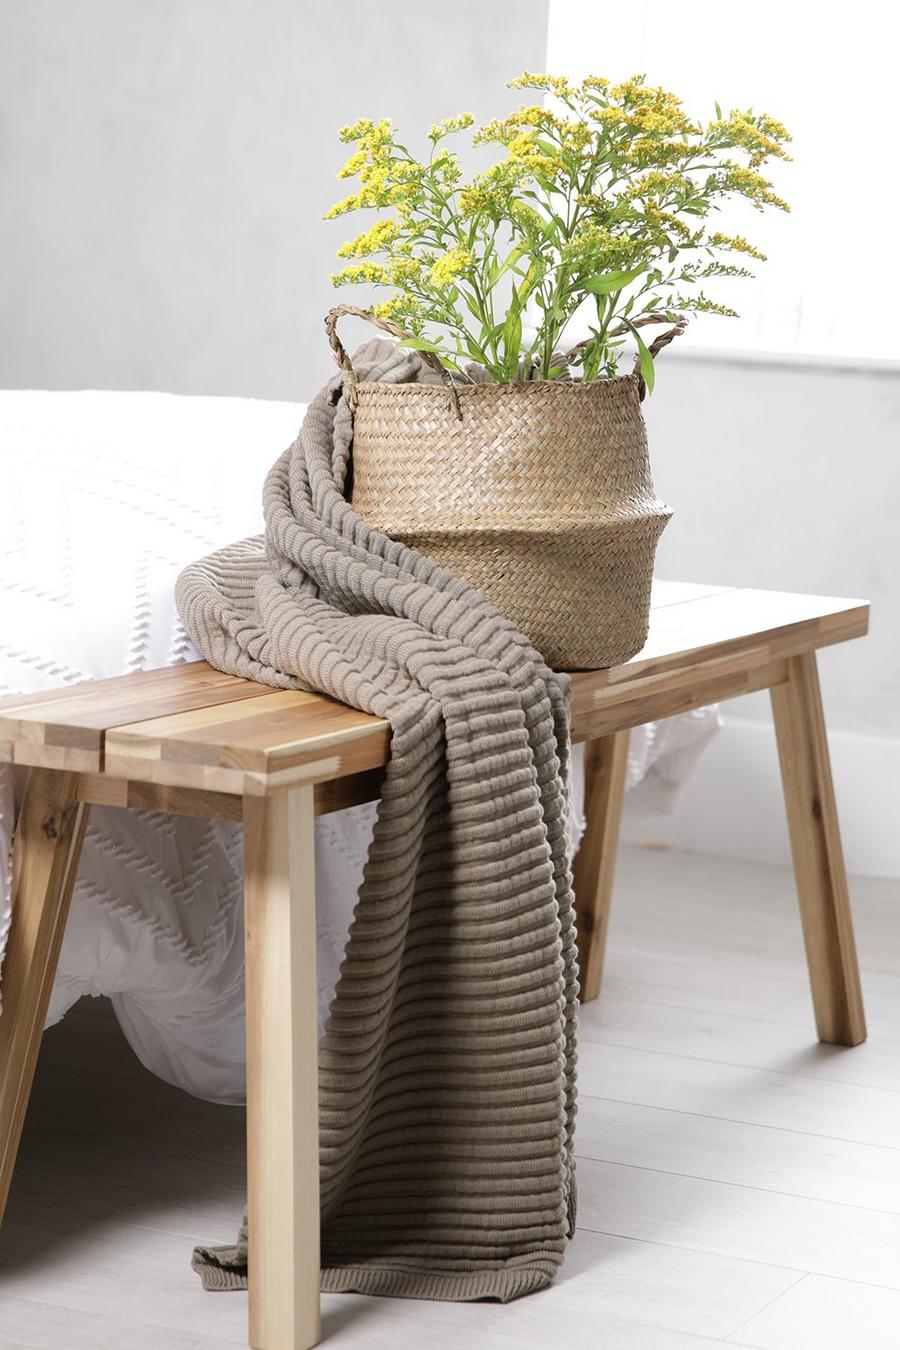 Weaved Seagrass Natural Basket